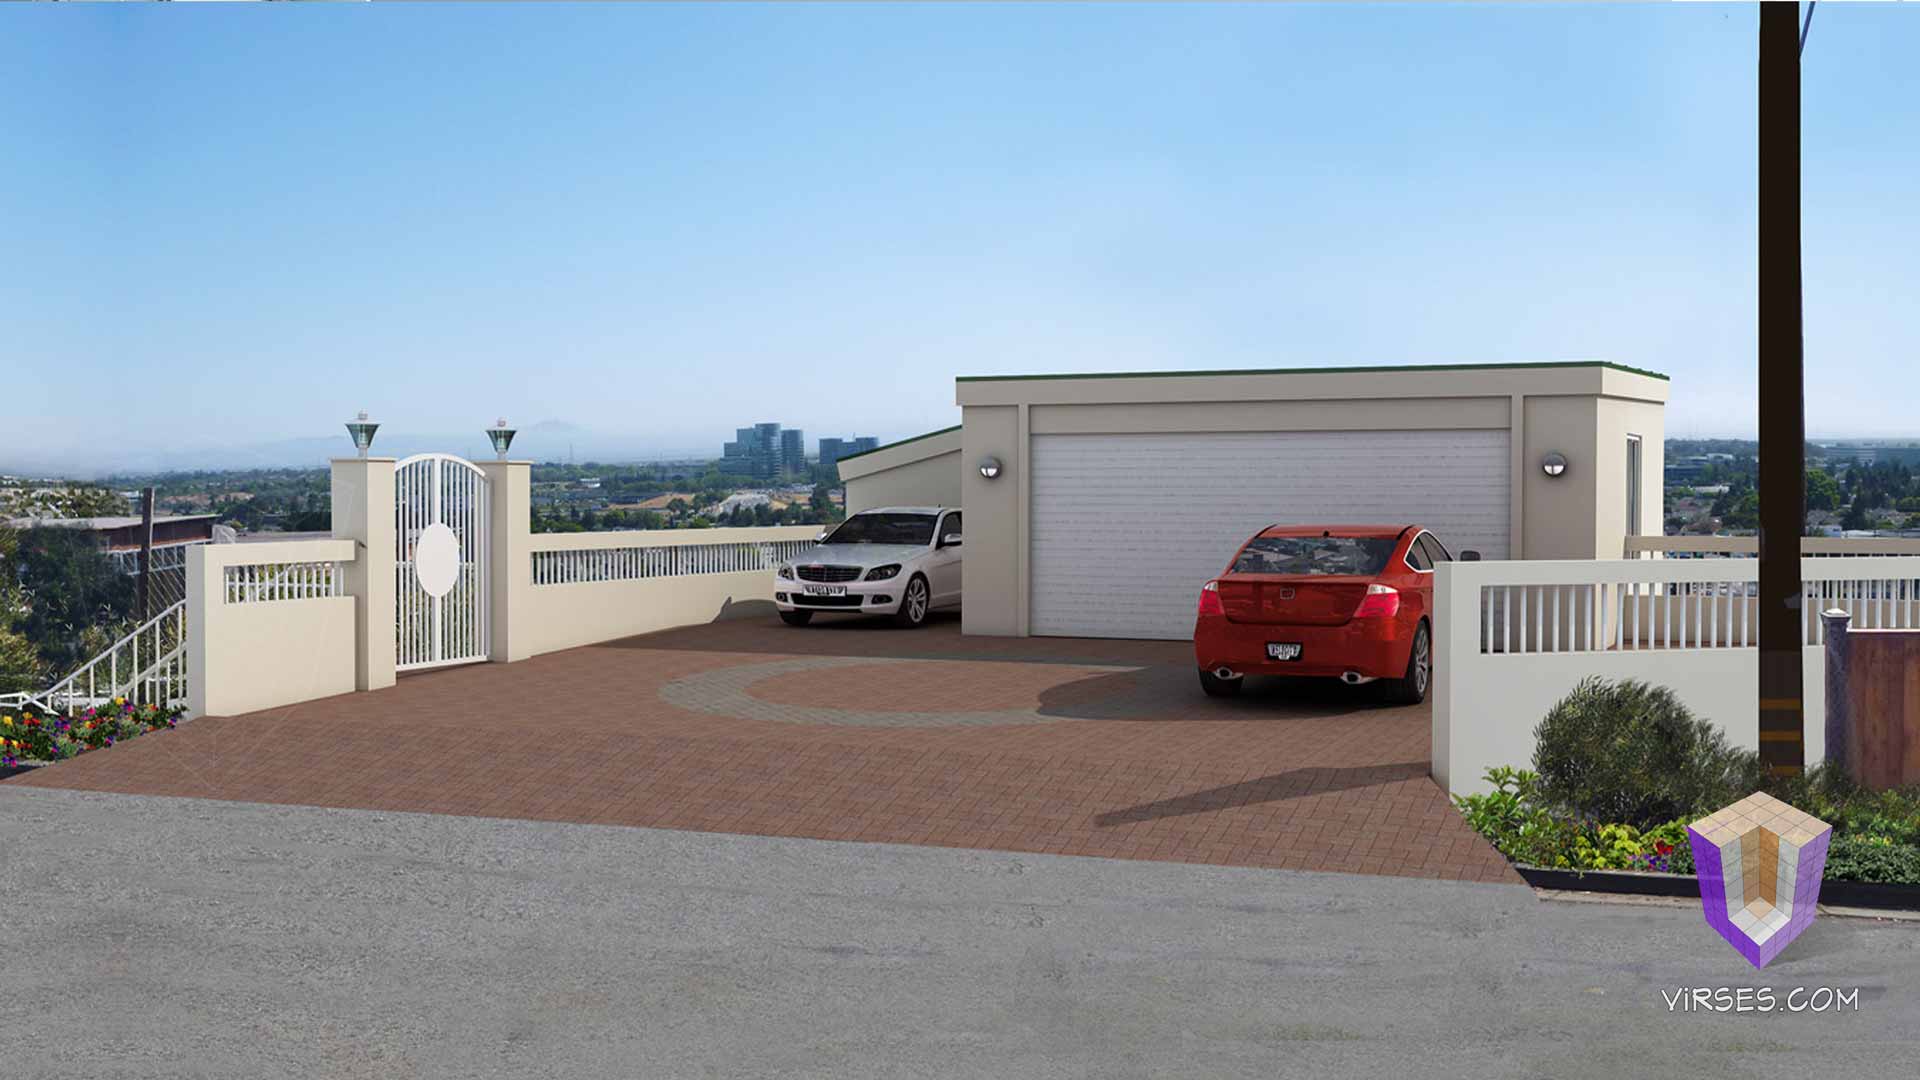 Driveway Addition and Renovation Architectural Rendering